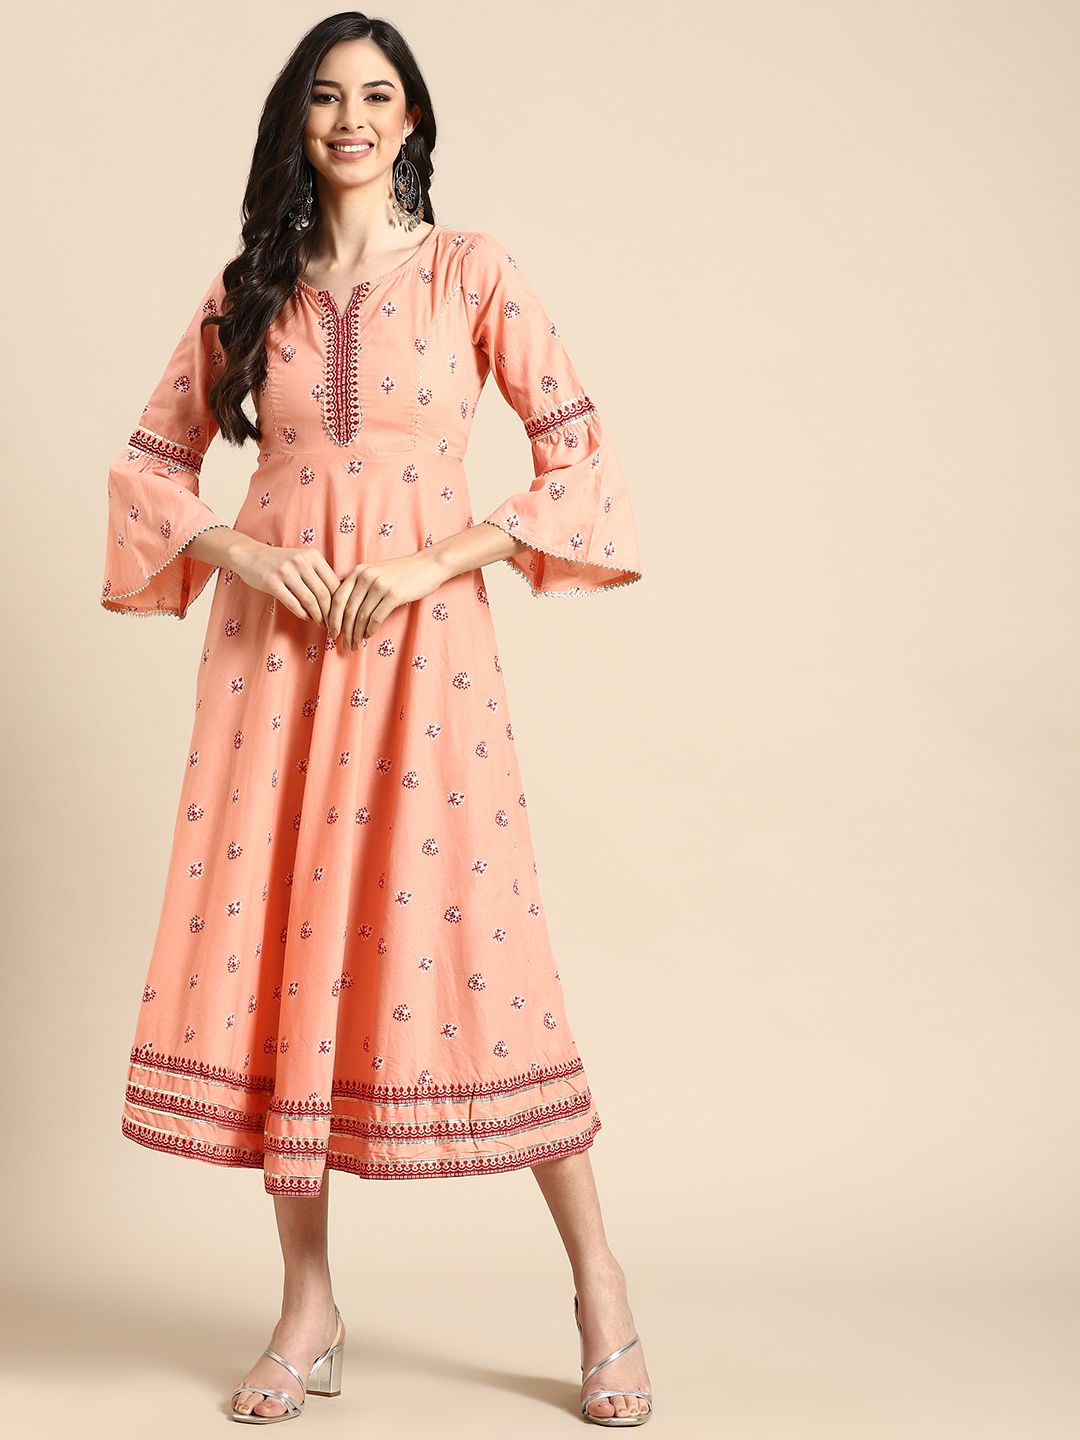 RANGMAYEE Peach-Coloured & Black Floral Ethnic Flared Sleeves A-Line Midi Dress Price in India